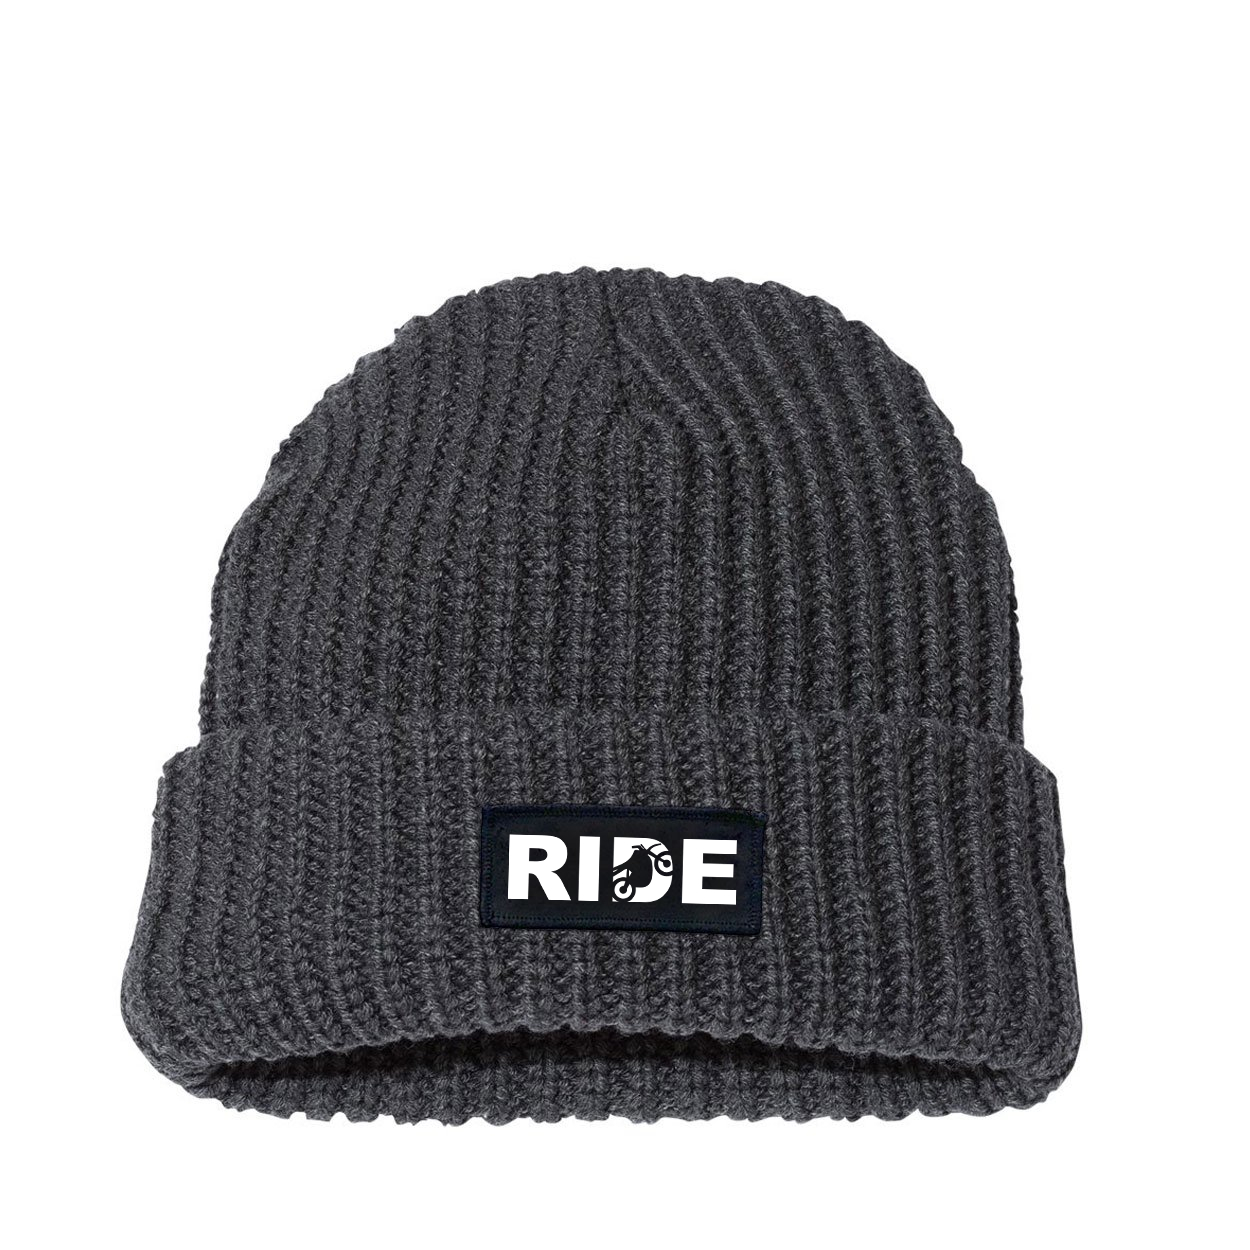 Ride Moto Logo Night Out Woven Patch Roll Up Jumbo Chunky Knit Beanie Charcoal (White Logo)